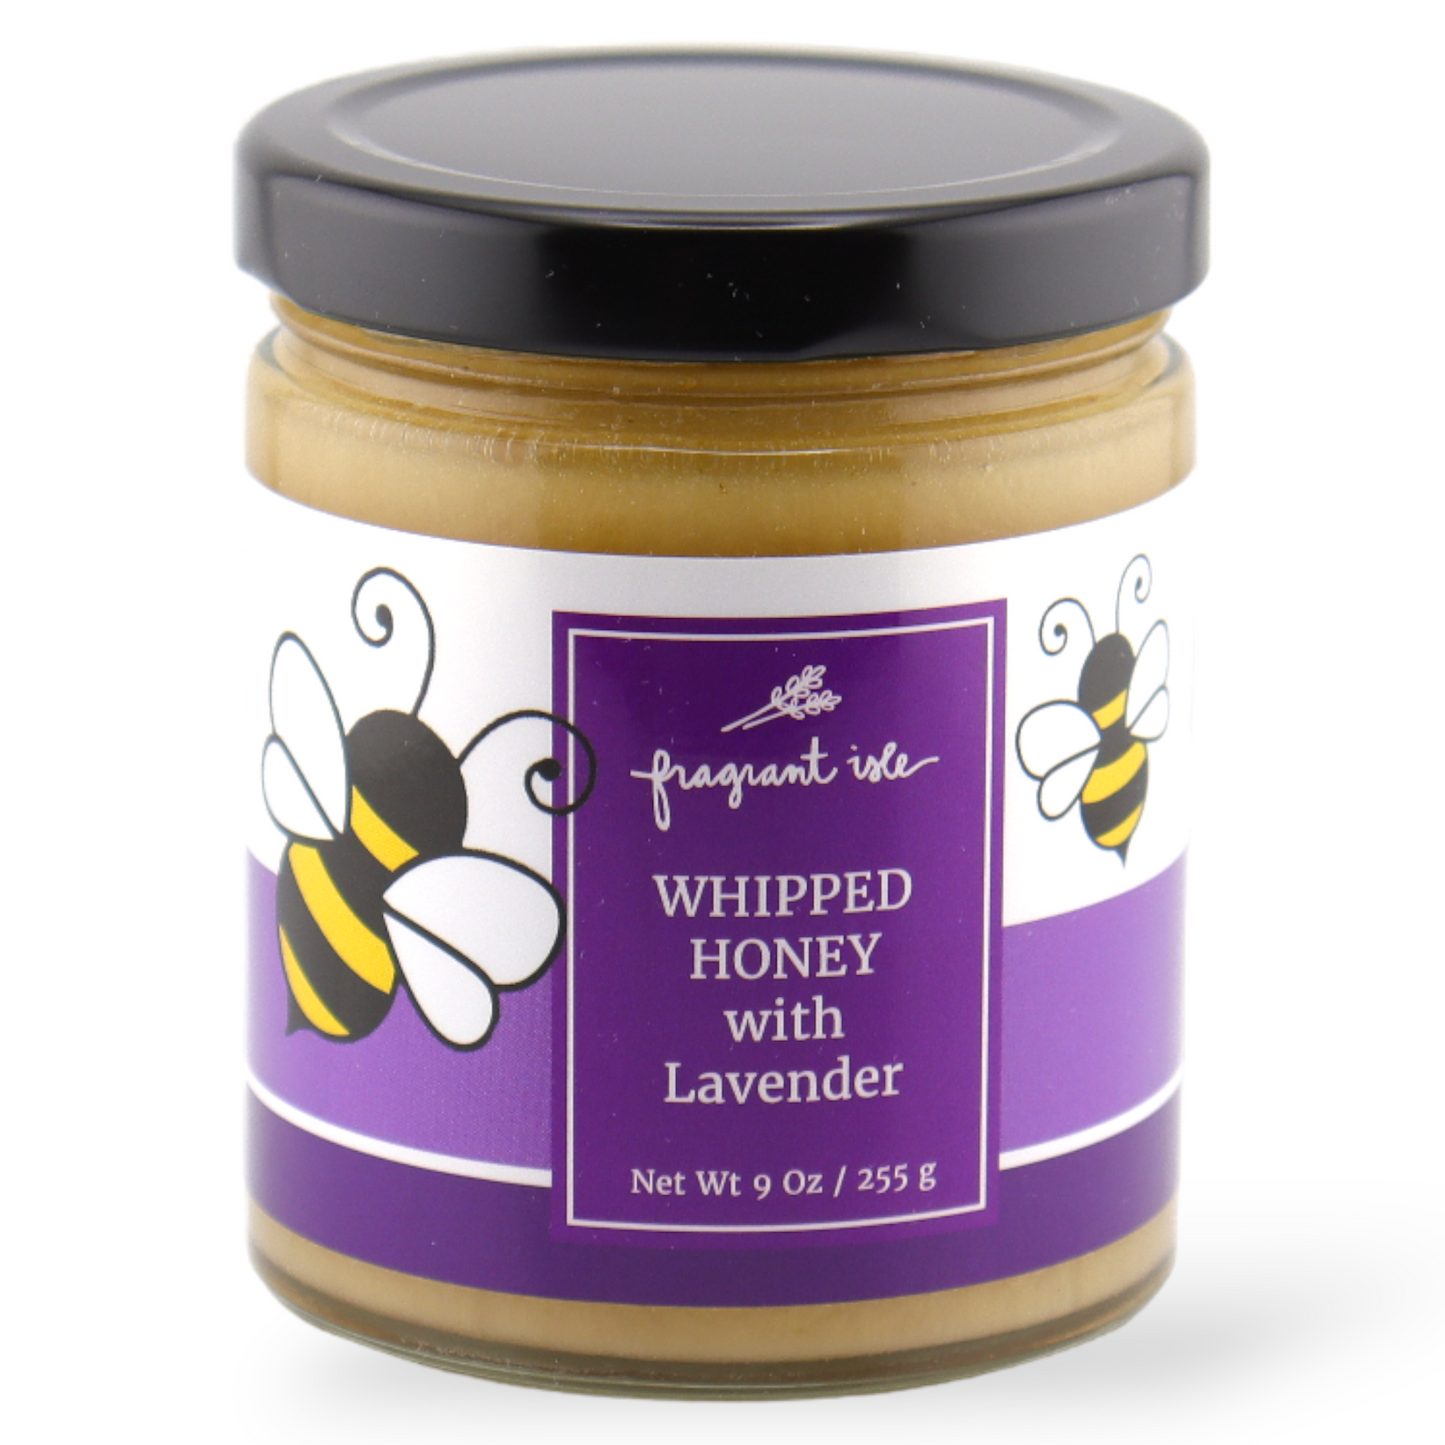 Whipped Honey with Lavender - 9 oz